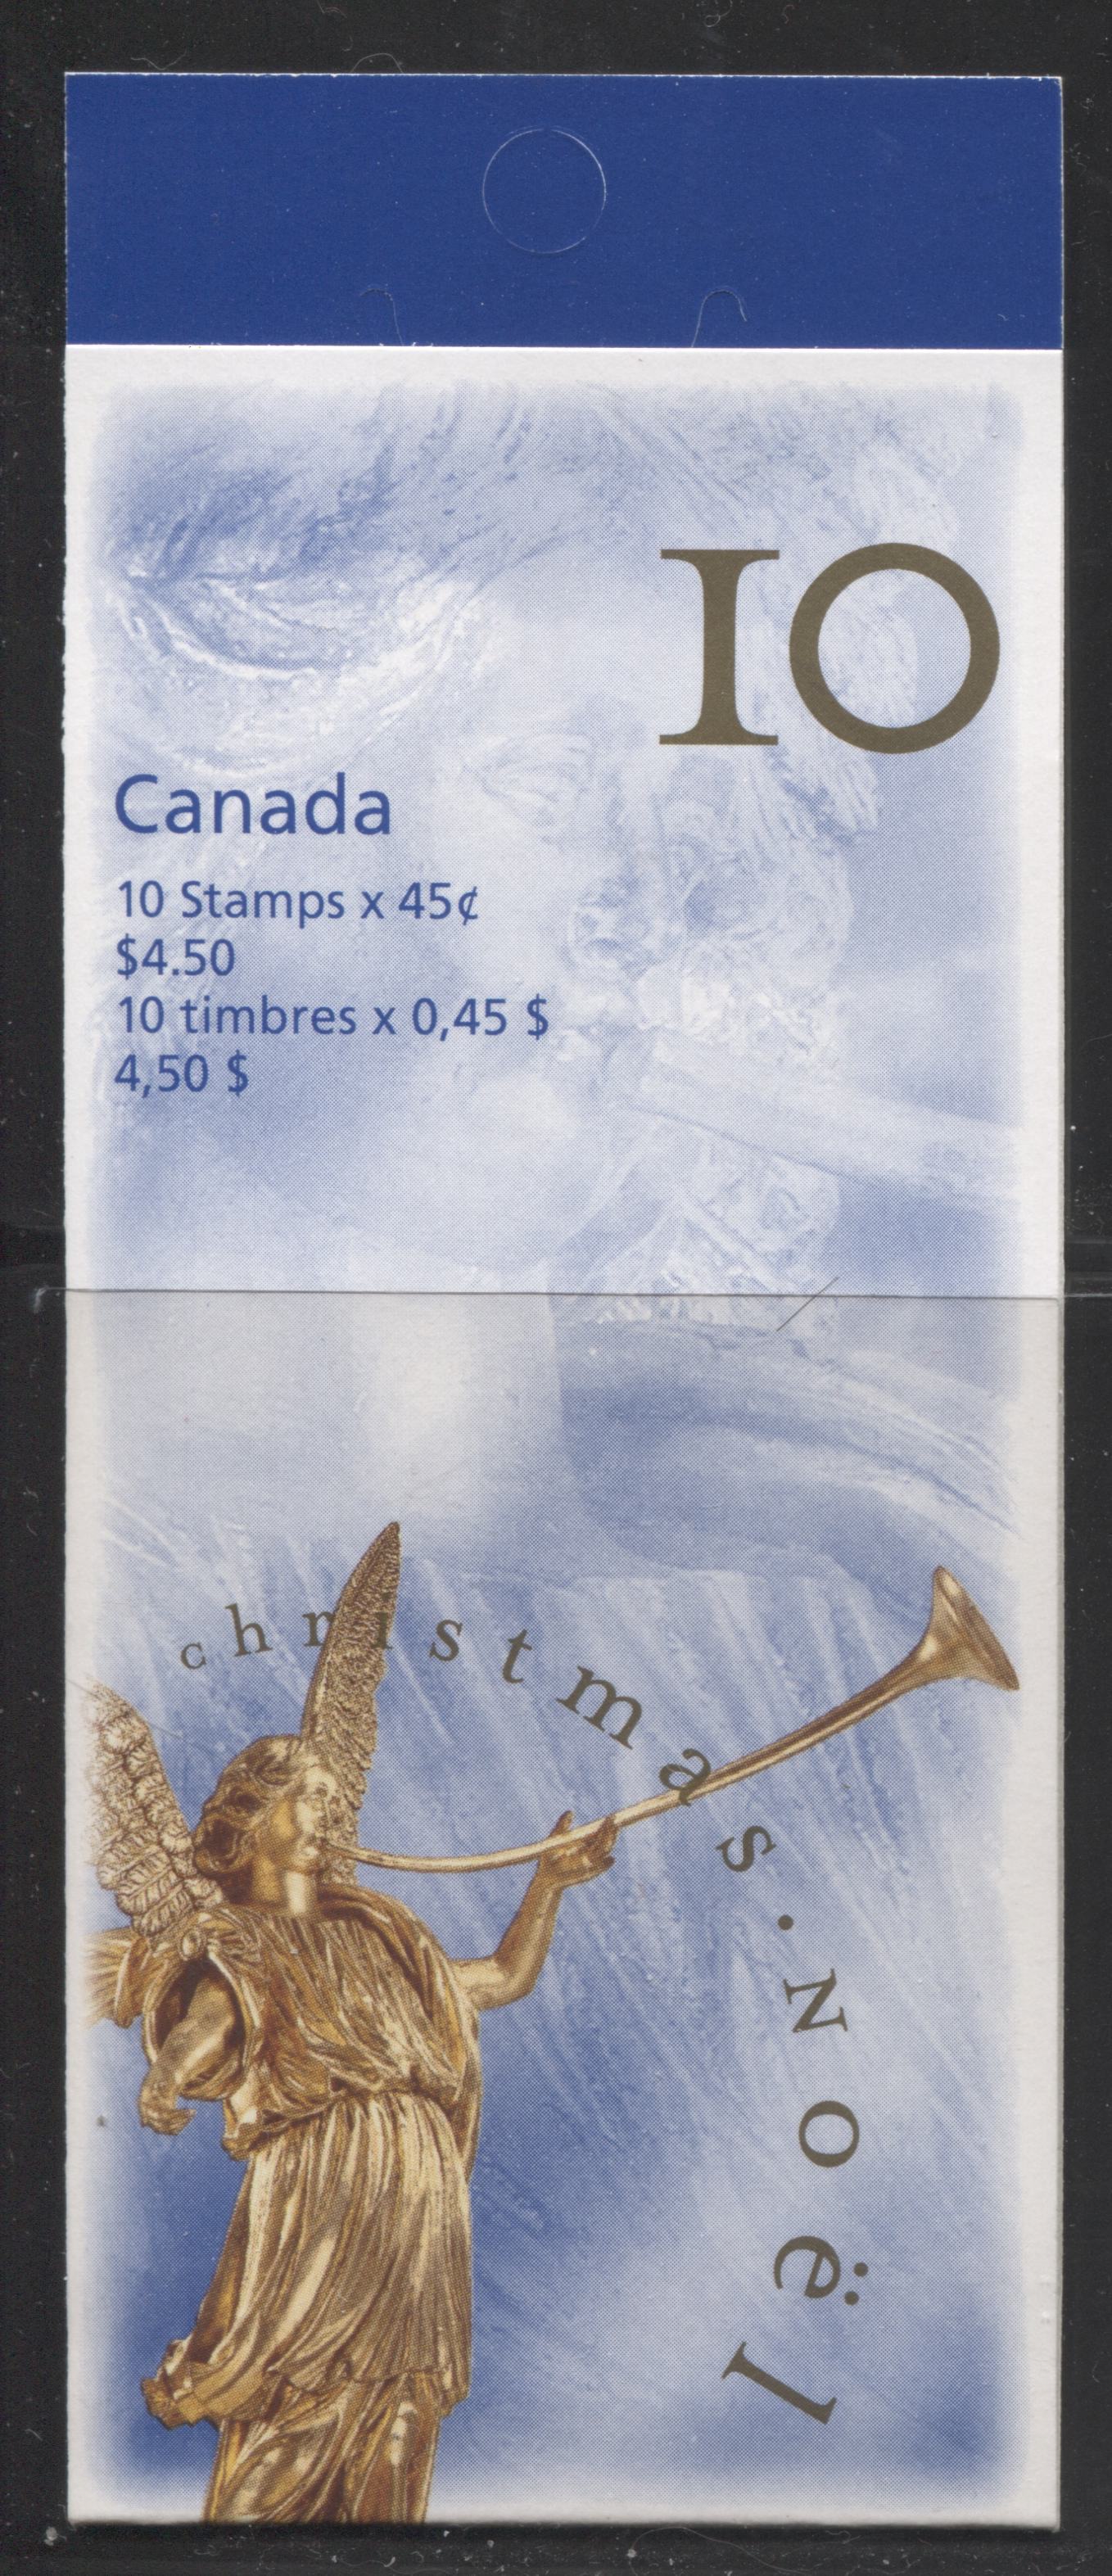 Canada #BK211a-Ab 1998 Christmas Issue, Complete $4.50 Booklet, Tullis Russell Coatings Paper, Dead Paper, 4 mm GT-4 Tagging Brixton Chrome 